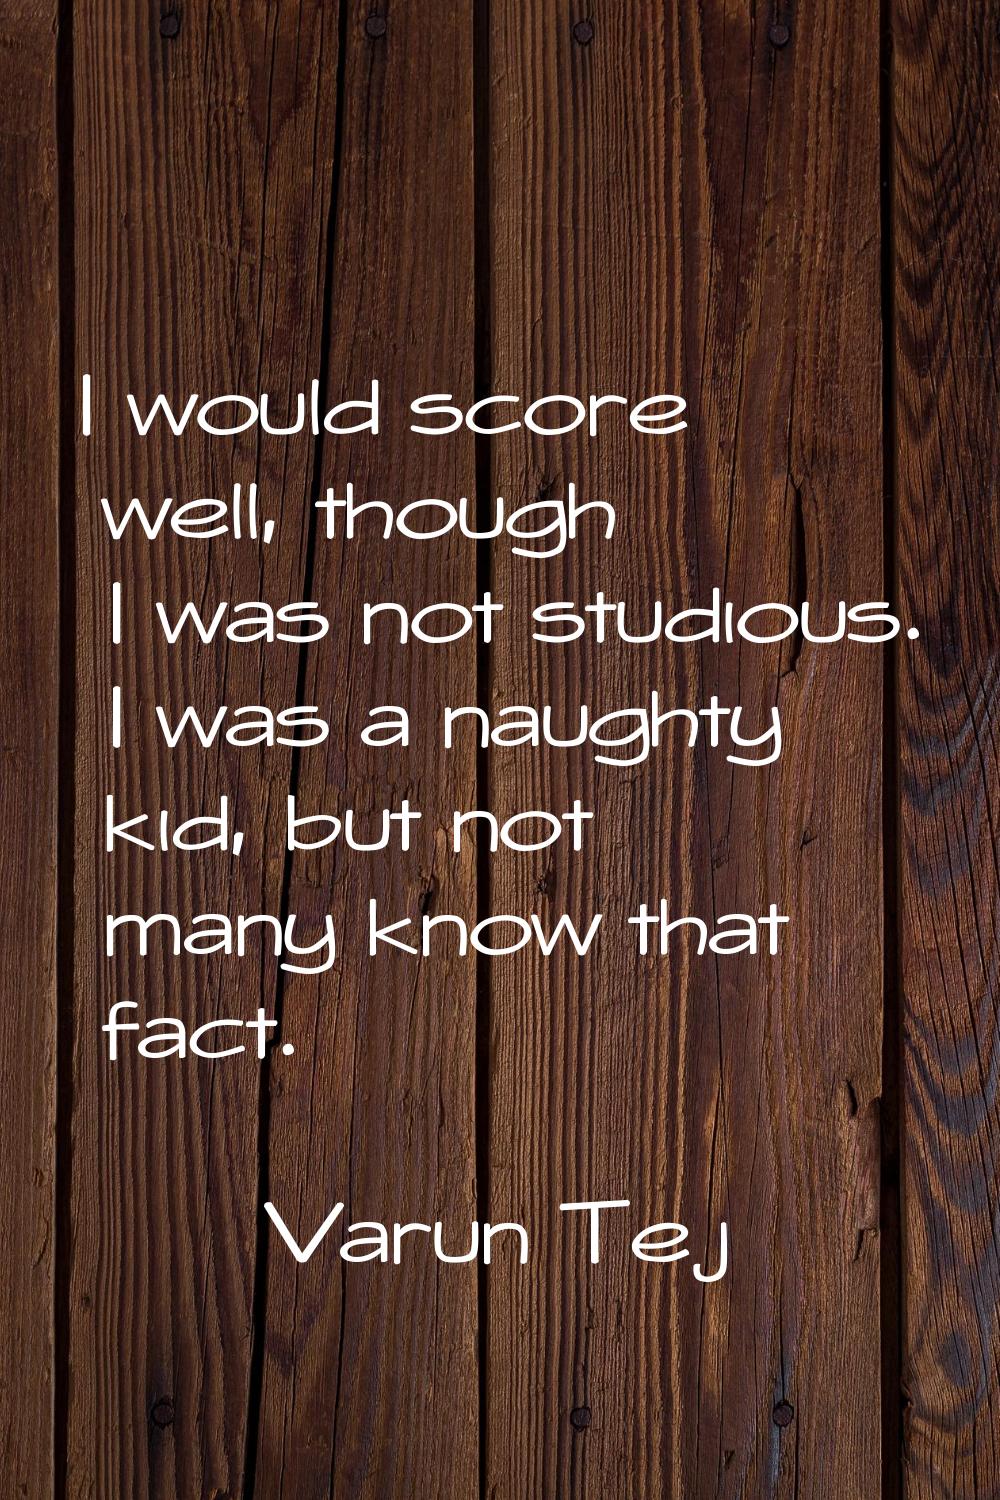 I would score well, though I was not studious. I was a naughty kid, but not many know that fact.